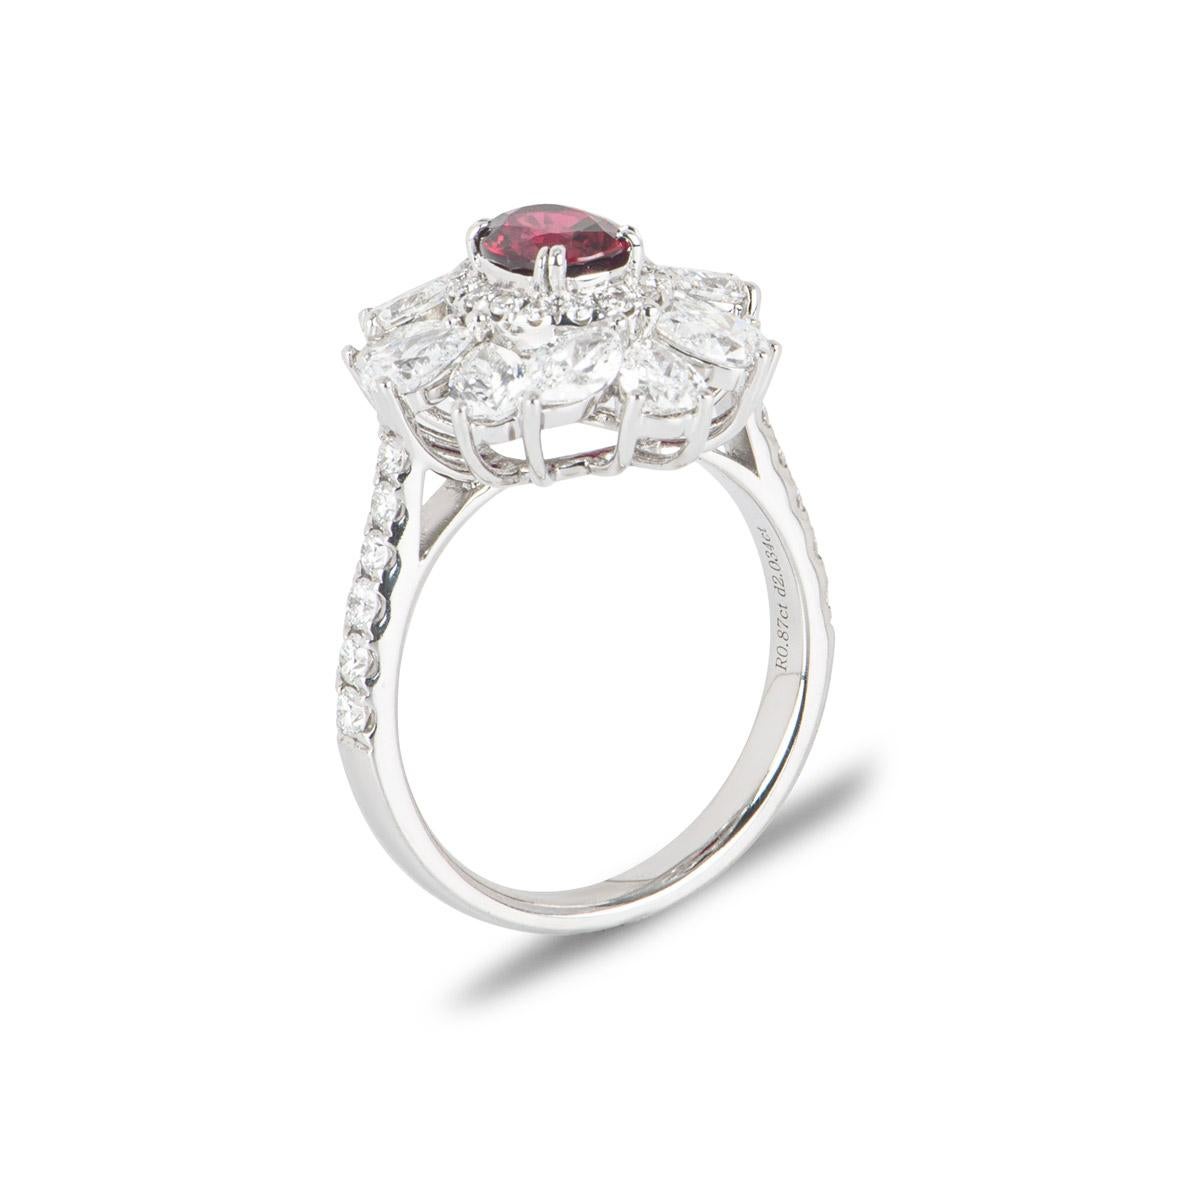 A gorgeous ruby and diamond dress ring. The ring is set to the centre with an oval cut ruby weighing 0.87ct displaying a deep red hue. The ruby is surrounded by a small halo of 16 round brilliant cut diamonds that are further complemented by